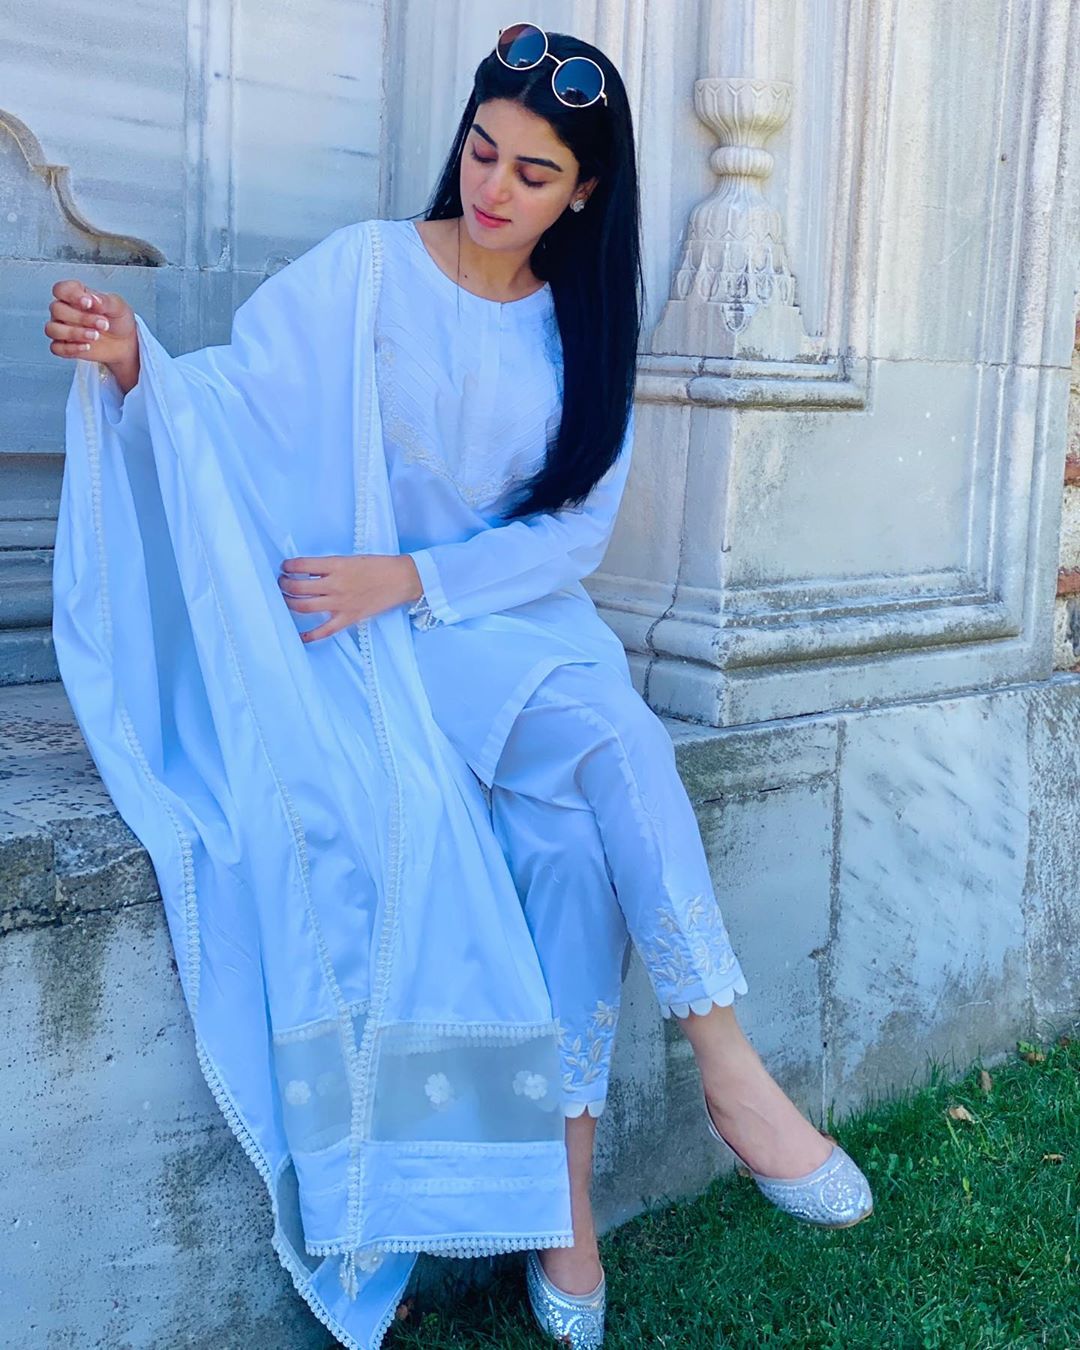 Latest Pictures of Actress Anmol Baloch from her Instagram